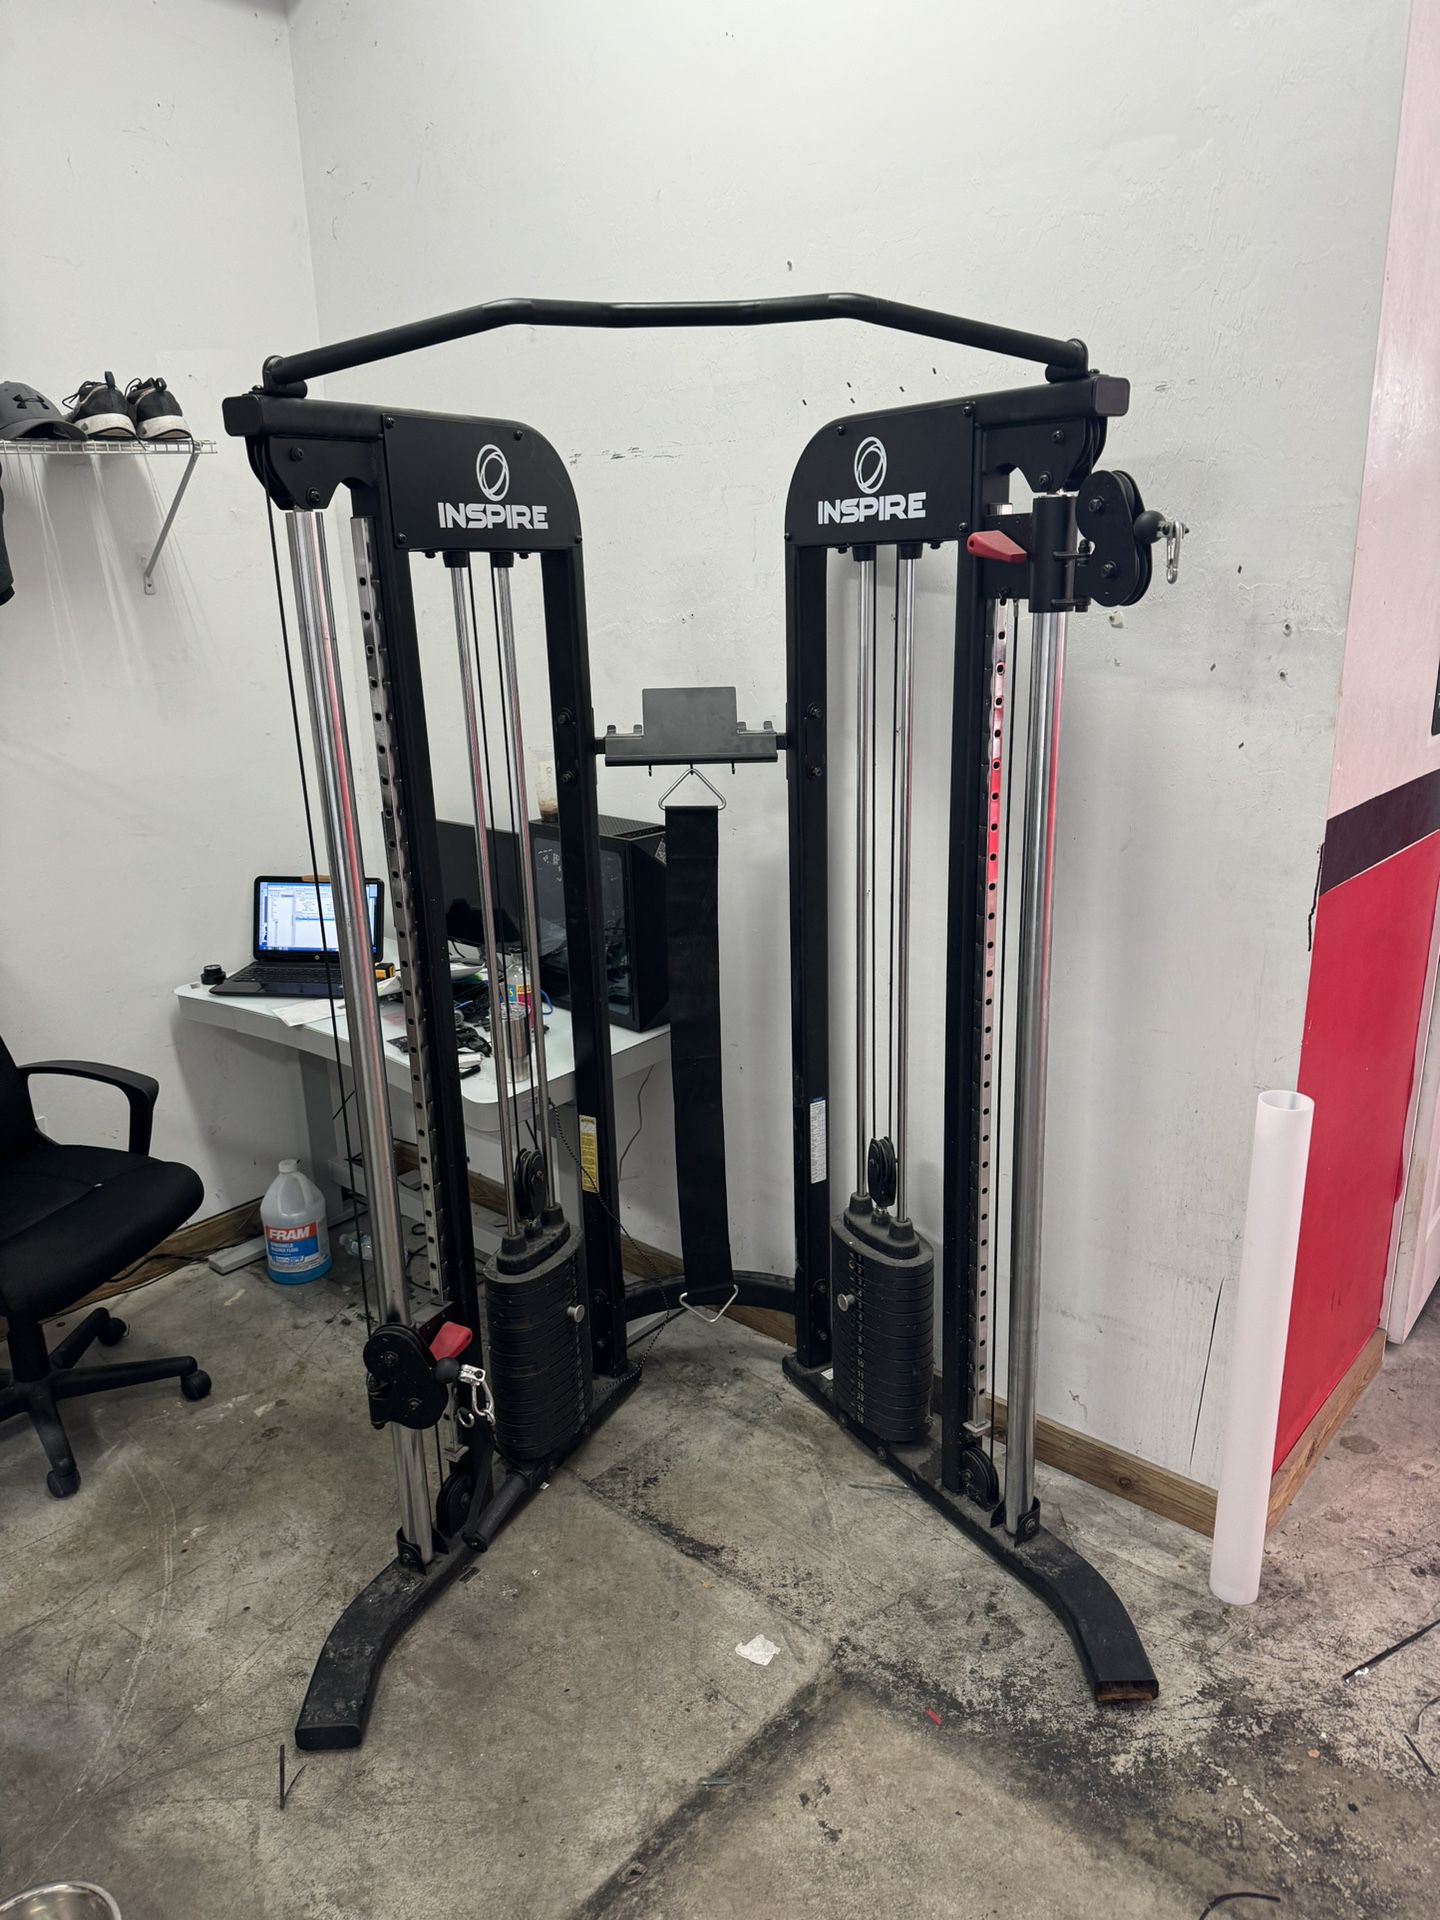 Inspire Home Gym All In One Workout Machine 